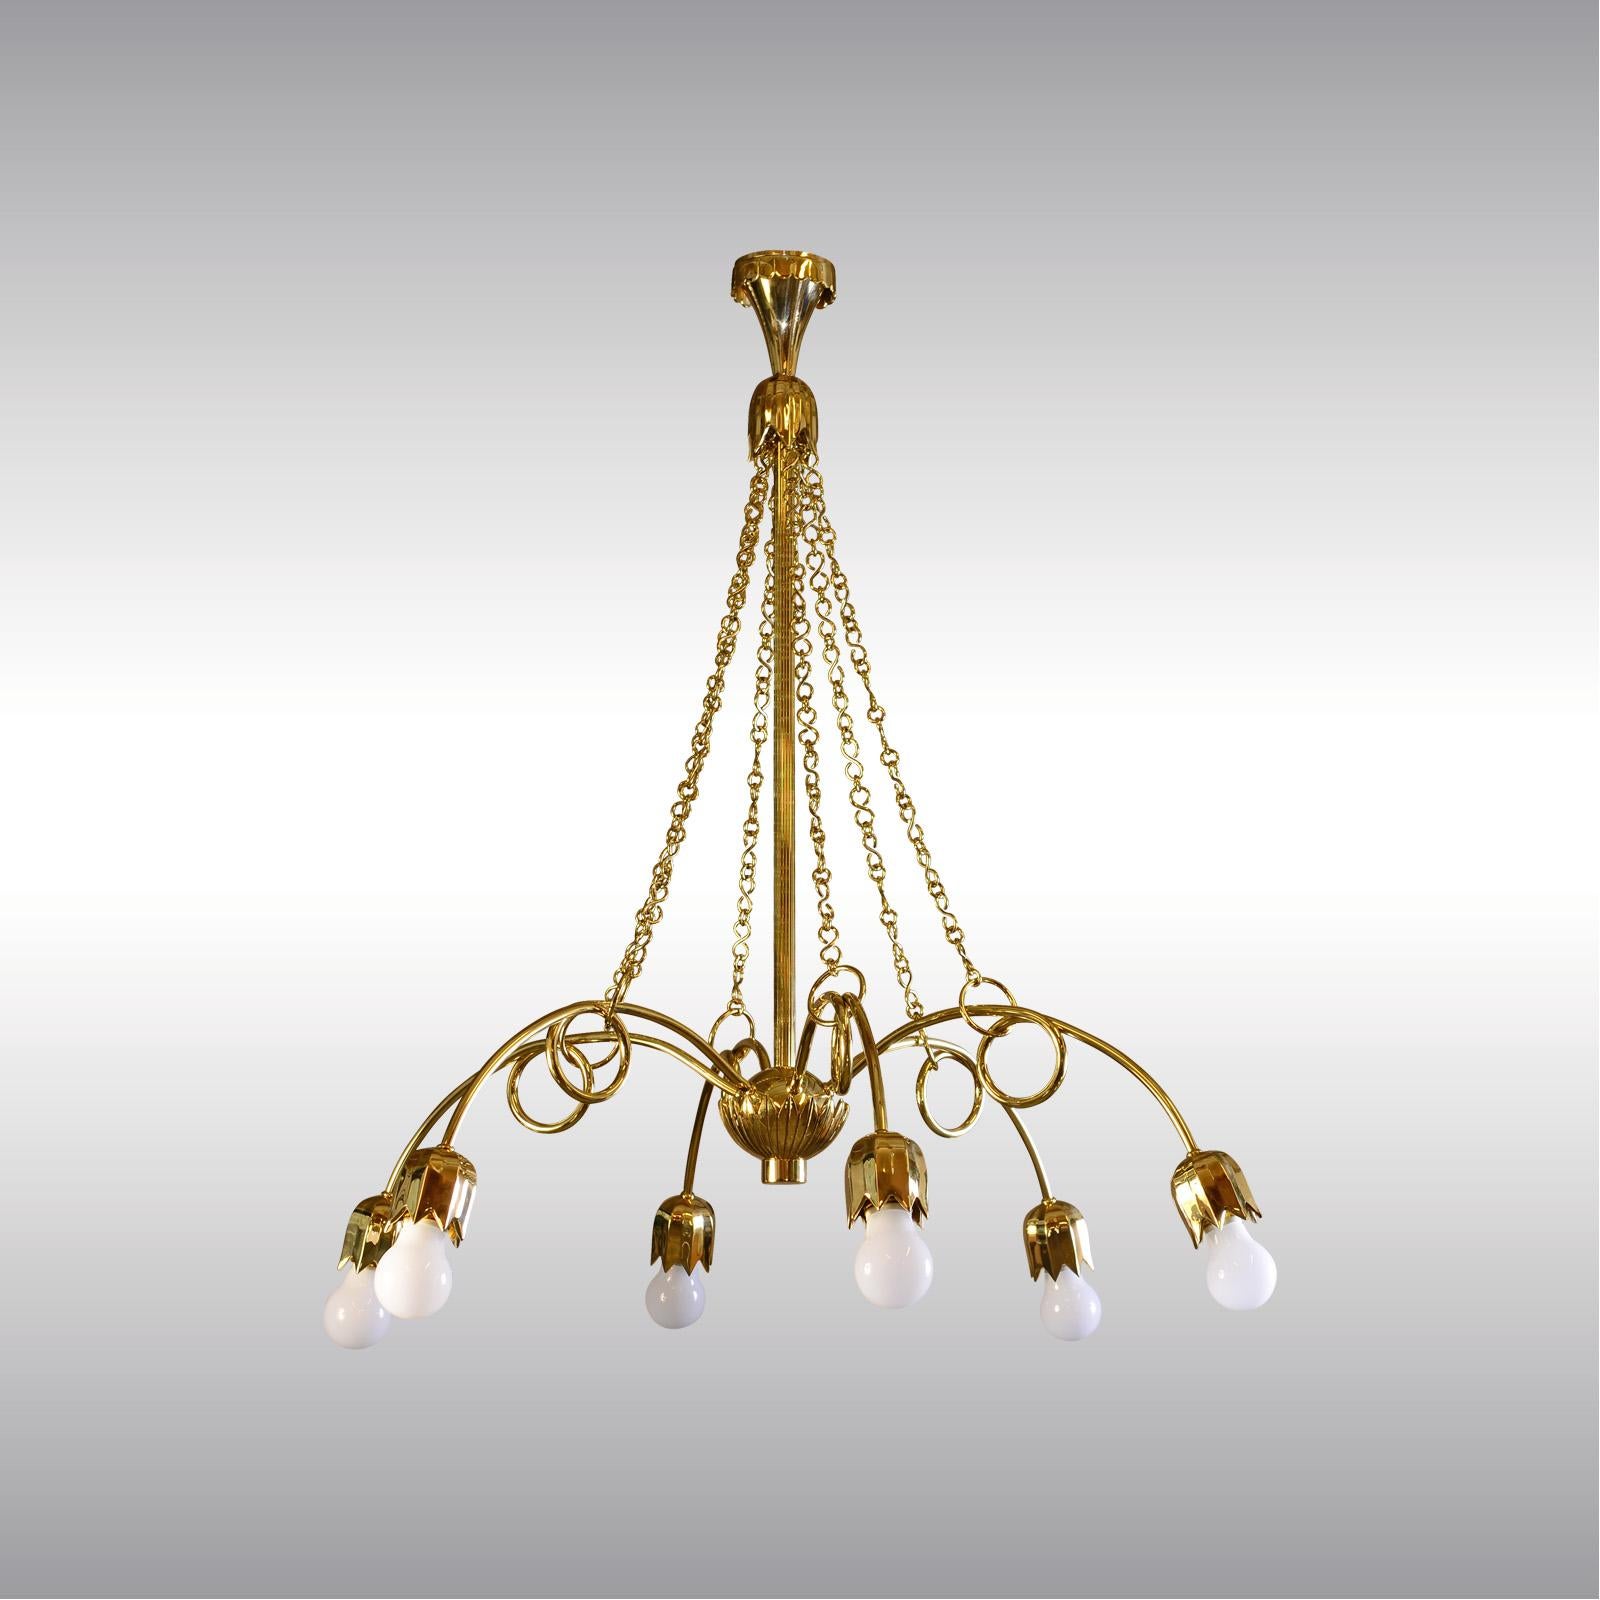 A really beautiful, modern and exclusive brass chandelier, chased, hammered and casted parts. Model# 3669-M and WWF 119-4-2 at the Wiener Werkstätte pattern-book at the MAK, Museum of Applied Arts Vienna. The historical image shows a Wiener